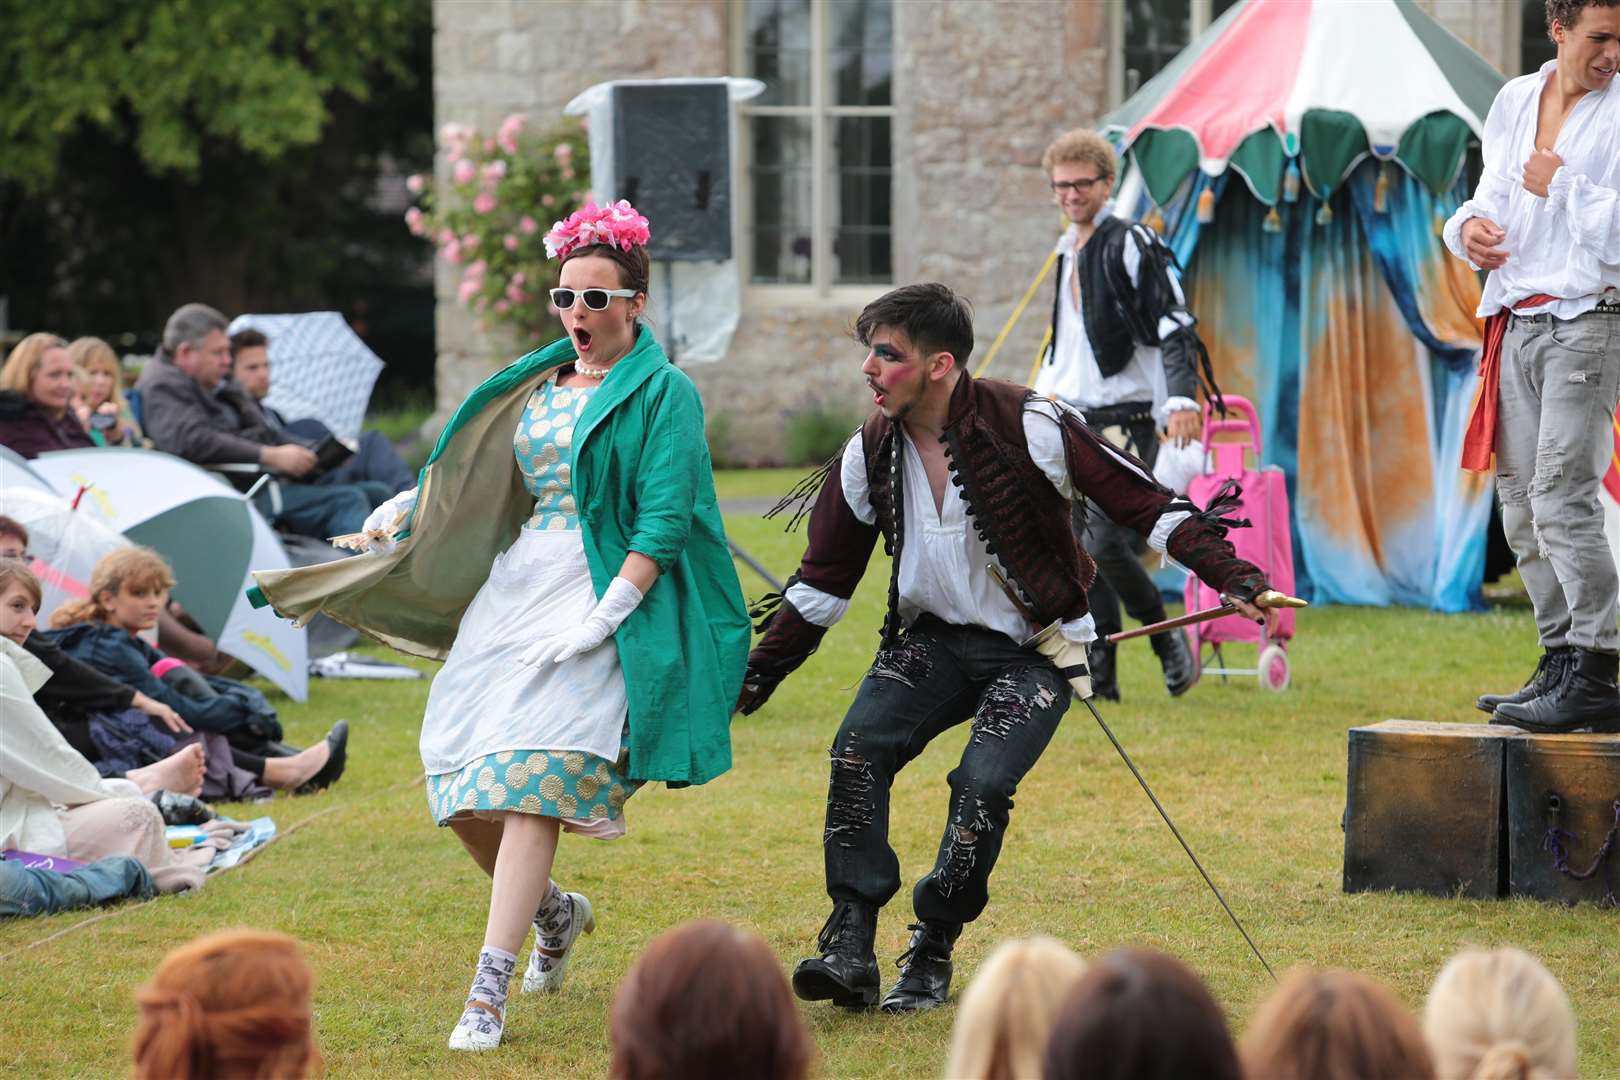 The Changeling Theatre's open air production will start at Boughton Monchelsea Place